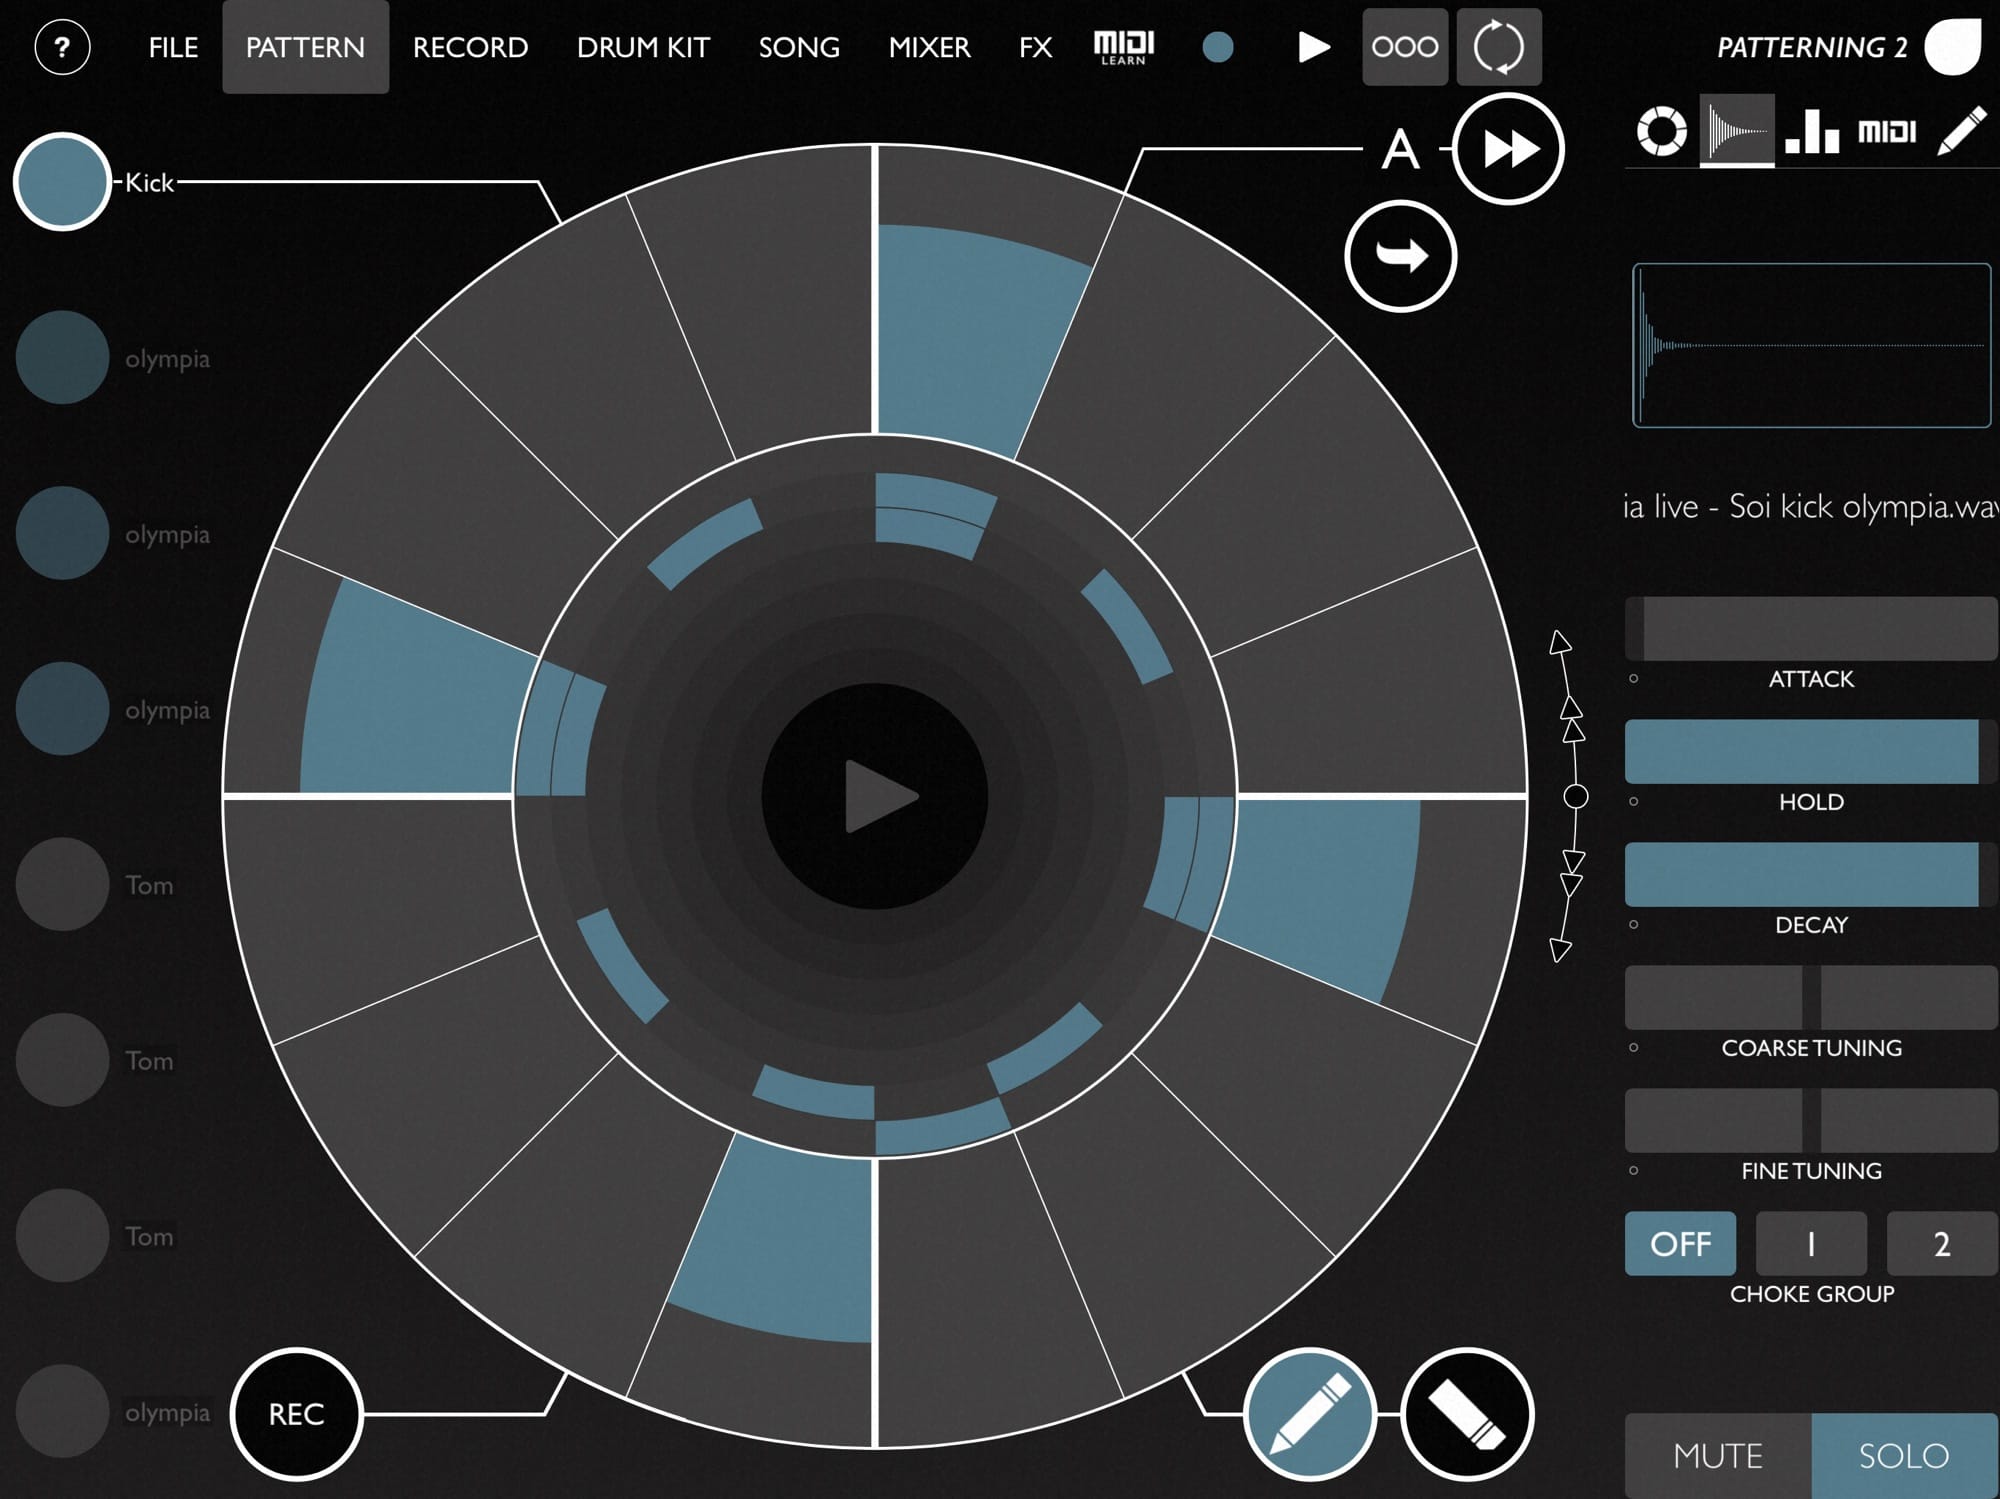 Patterning is a powerful drum-machine app.